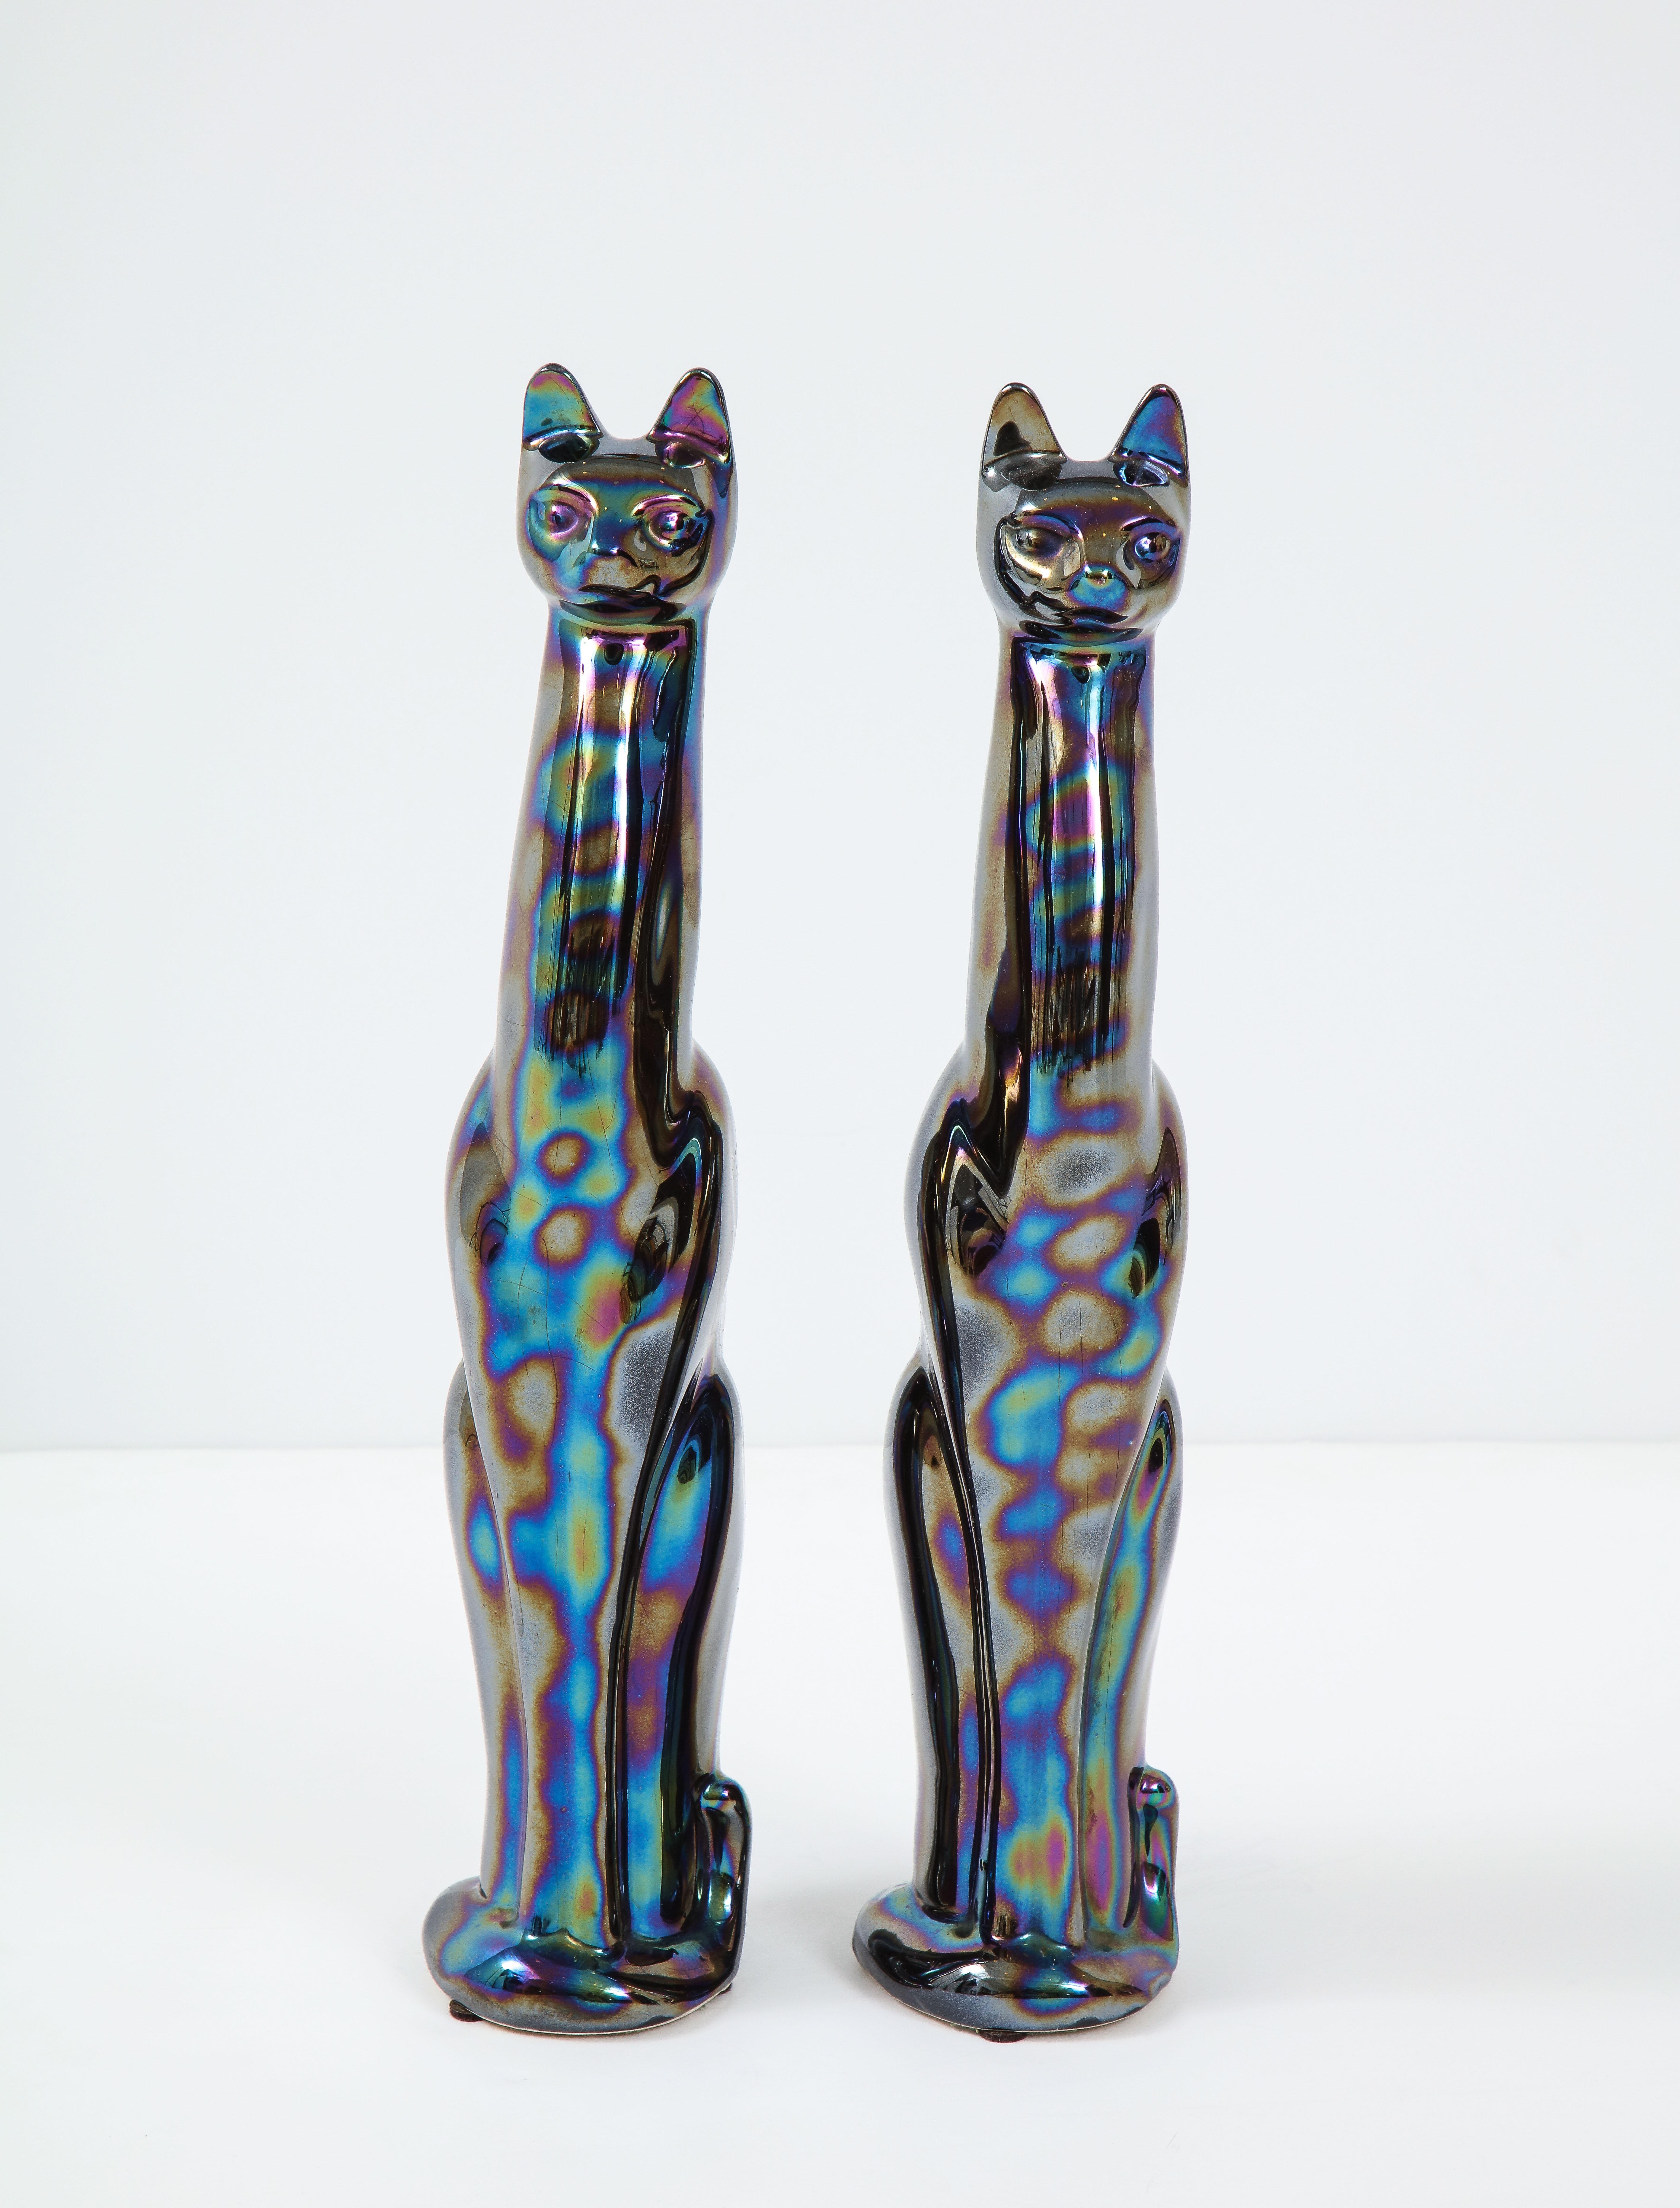 Pair of French midcentury stylized cat figures featuring an iridescent glaze.